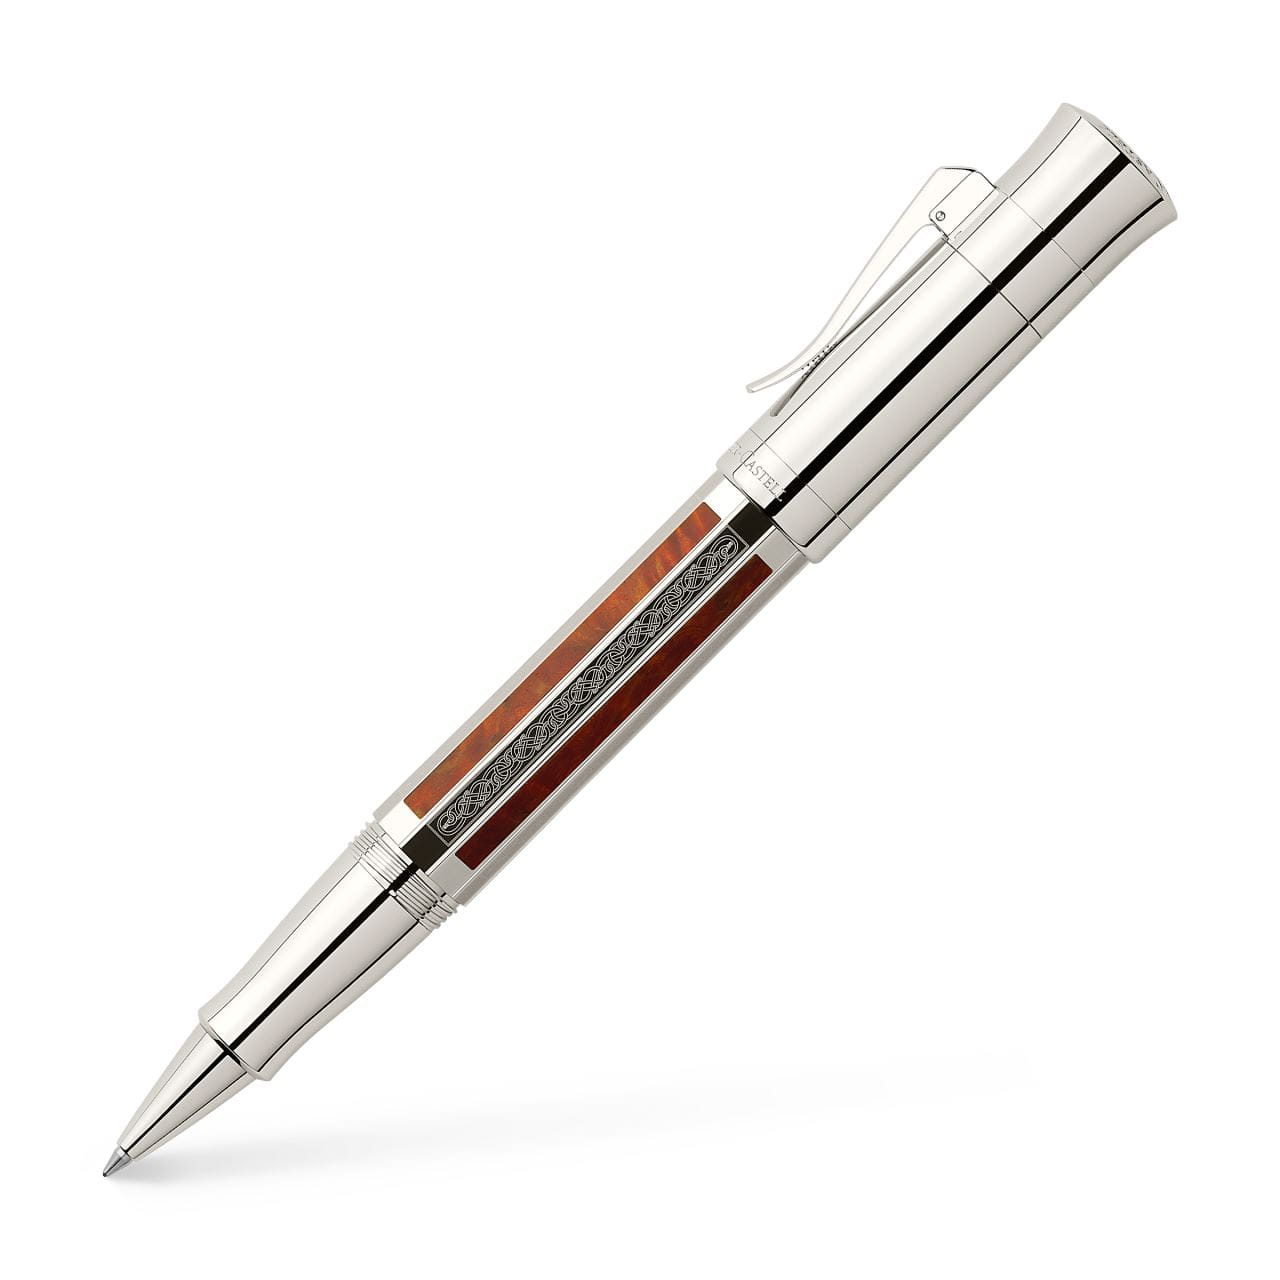 Graf-von-Faber-Castell - Rollerball pen Pen of the Year 2017 platinum-plated